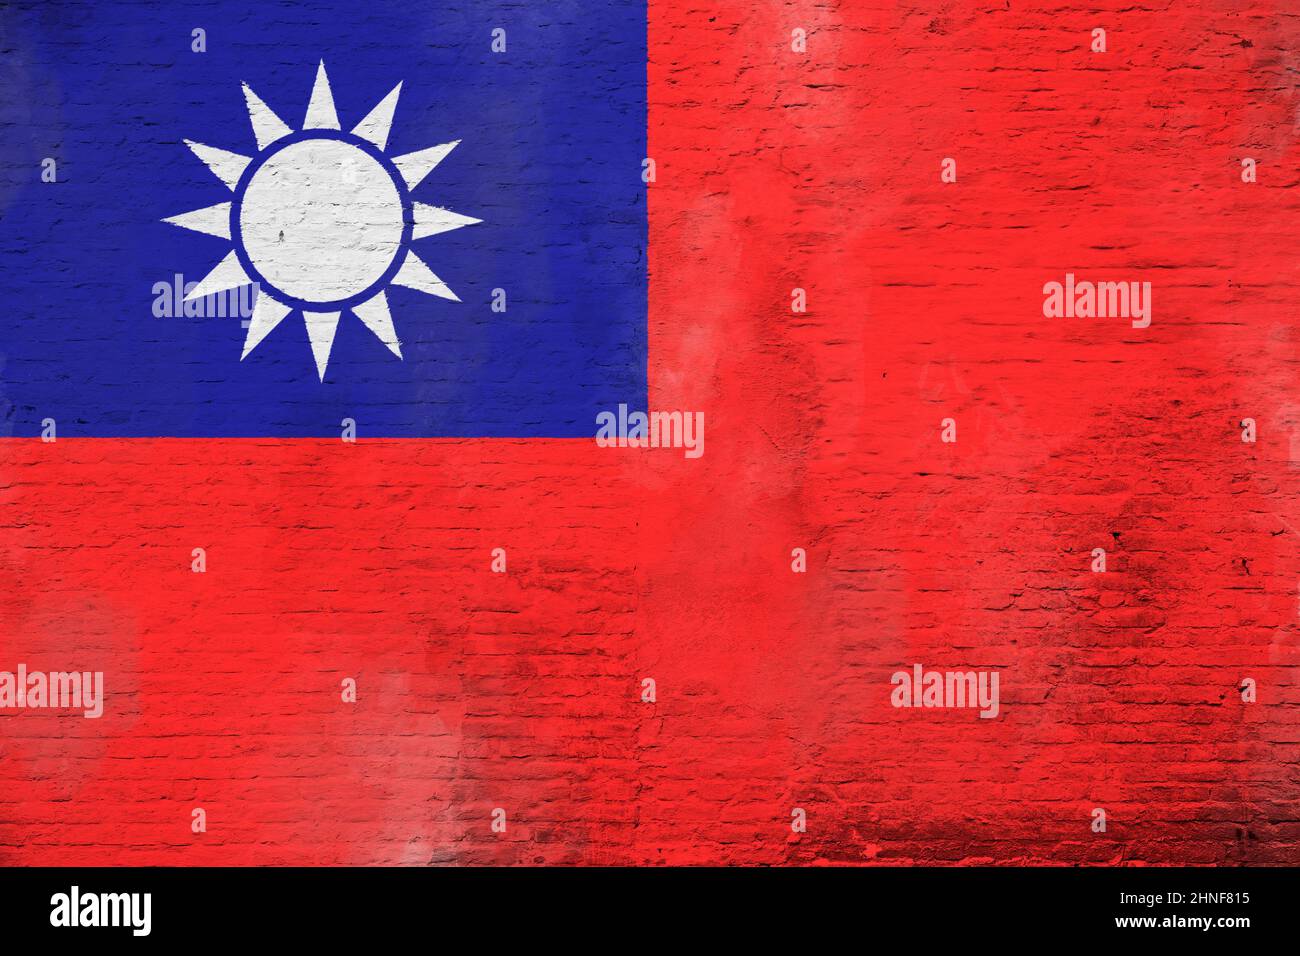 Full frame photo of a weathered flag of Taiwan (Republic of China (ROC)) painted on a plastered brick wall. Stock Photo